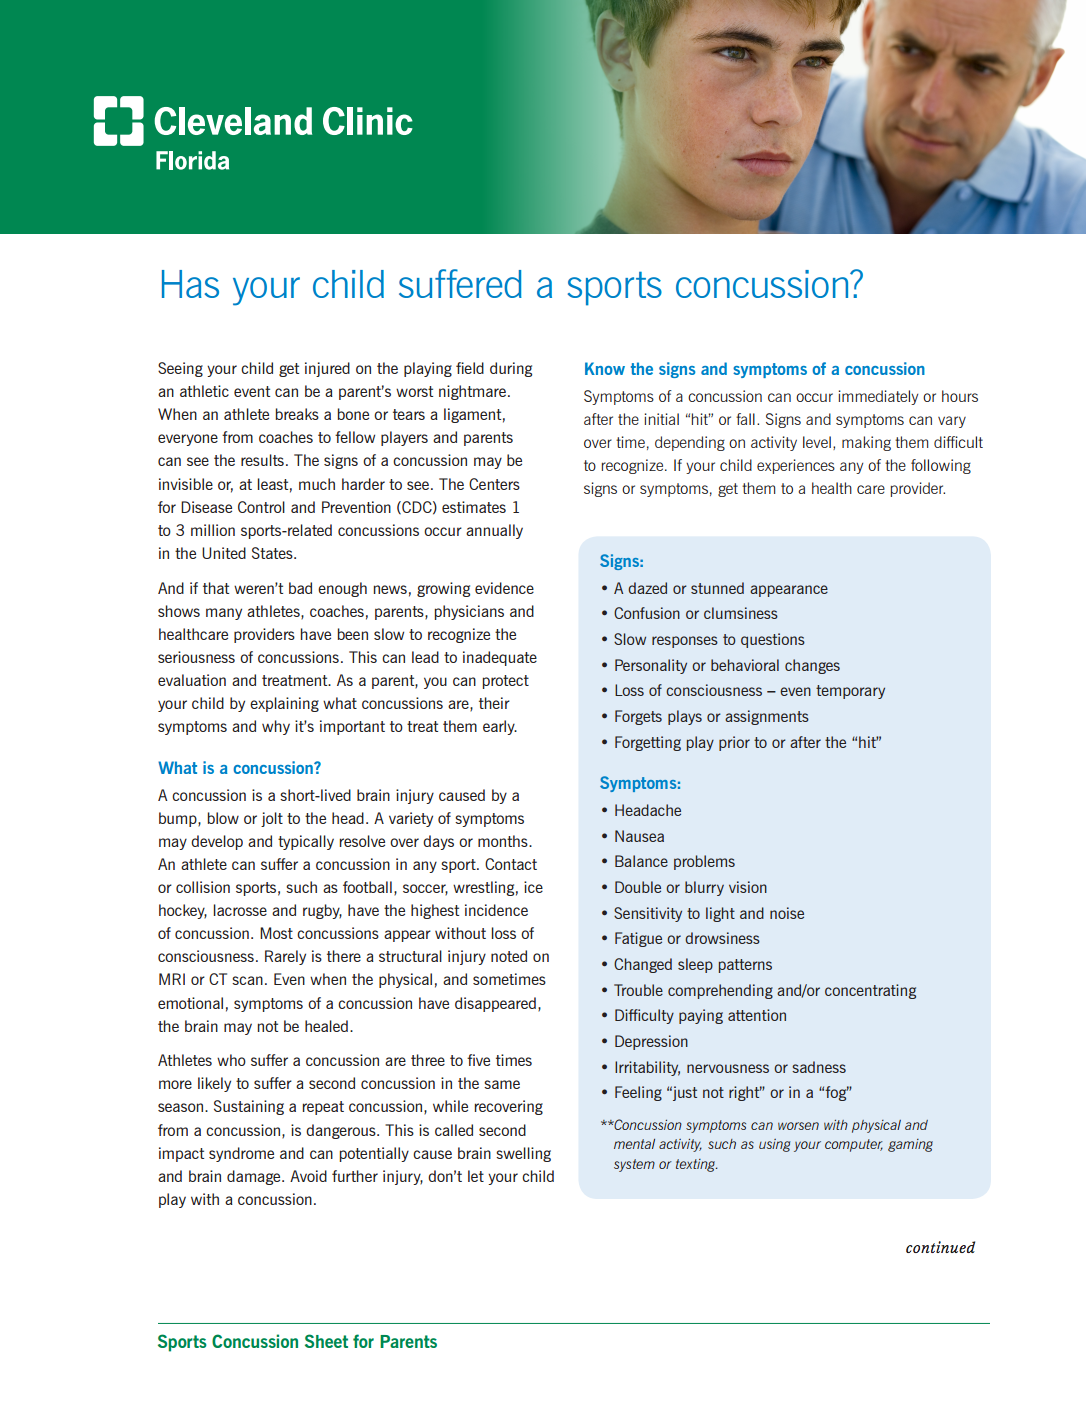 Sports Concussion Fact Sheet